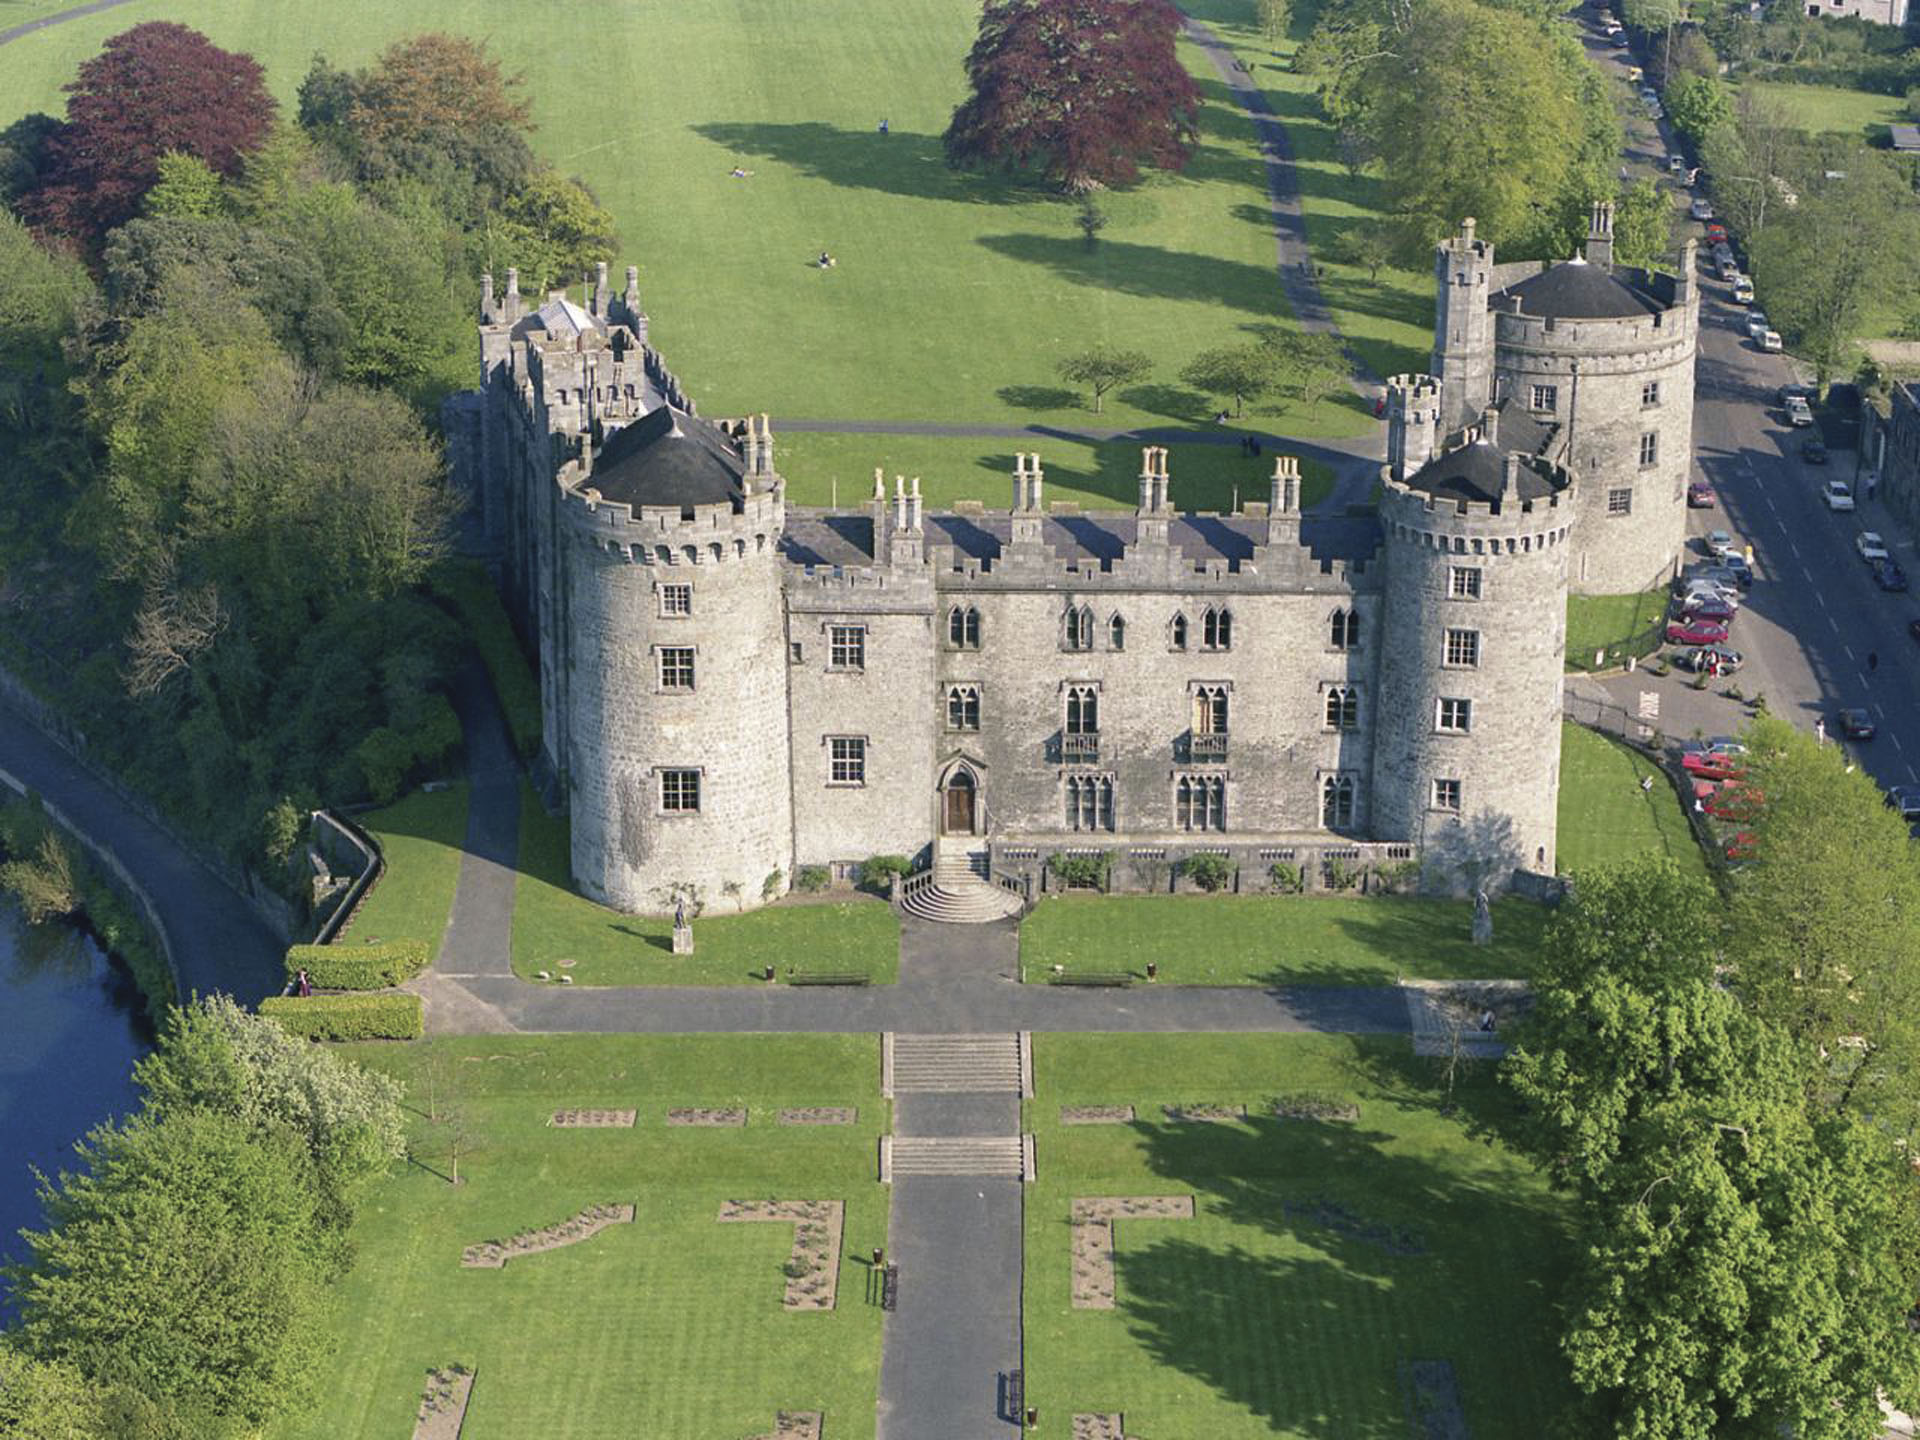 Kilkenny Castle, which was built in 1195 to control a fording-point of the River Nore and the junction of several routeways.